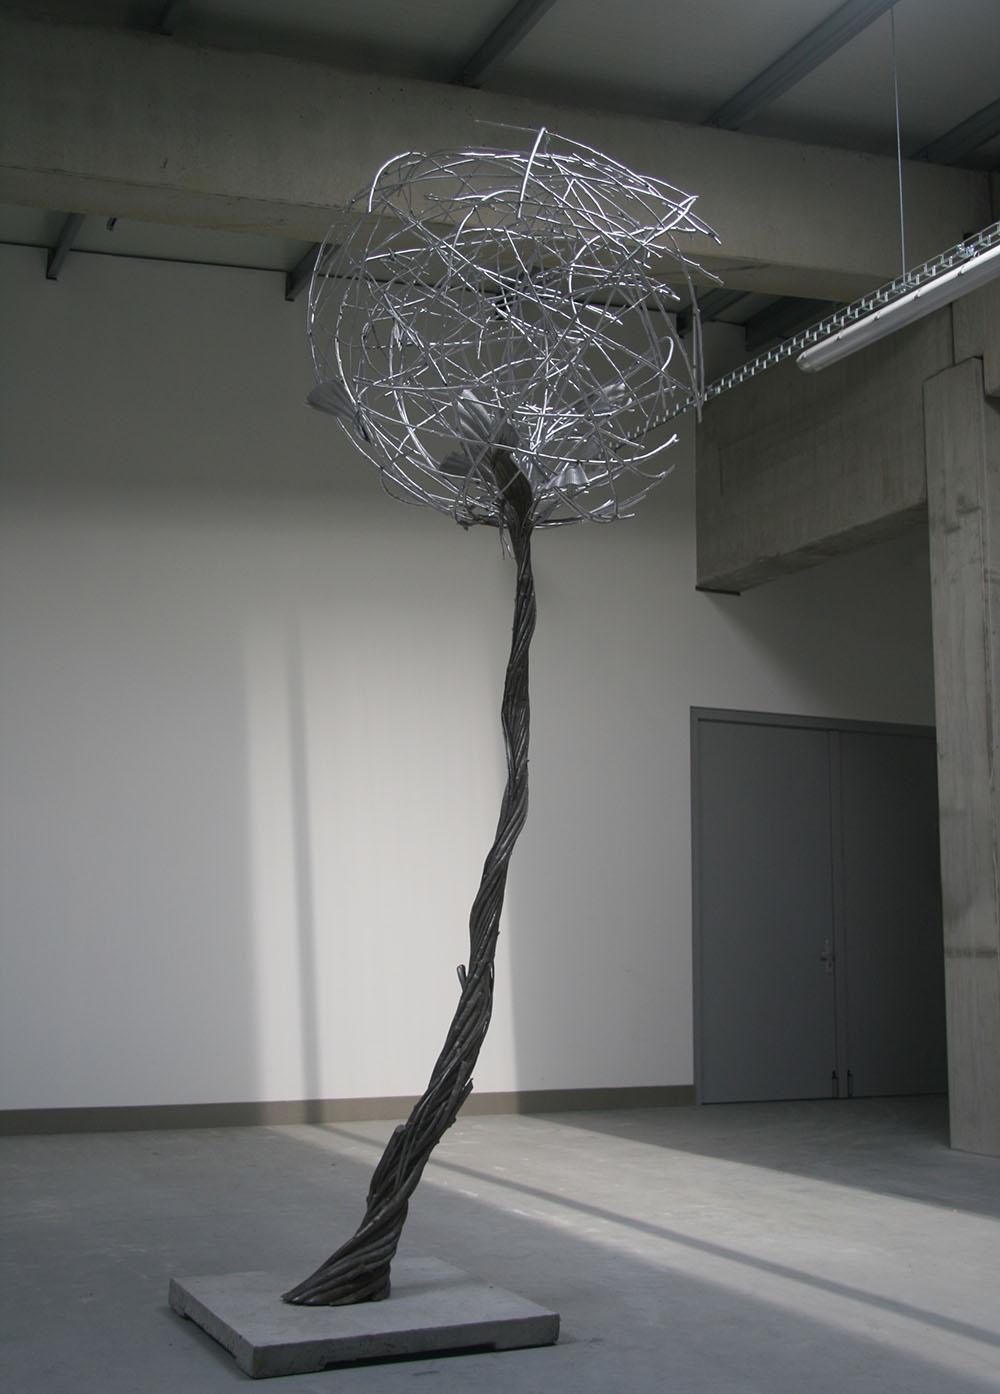 Large aluminum sculpture, by Czech artist Ondřej Oliva. 397 cm × 110 cm × 130 cm. Unique work.
In this sculpture, the artist works on an important subject in his production, to which he attributes an important symbolic value: trees. Ondřej